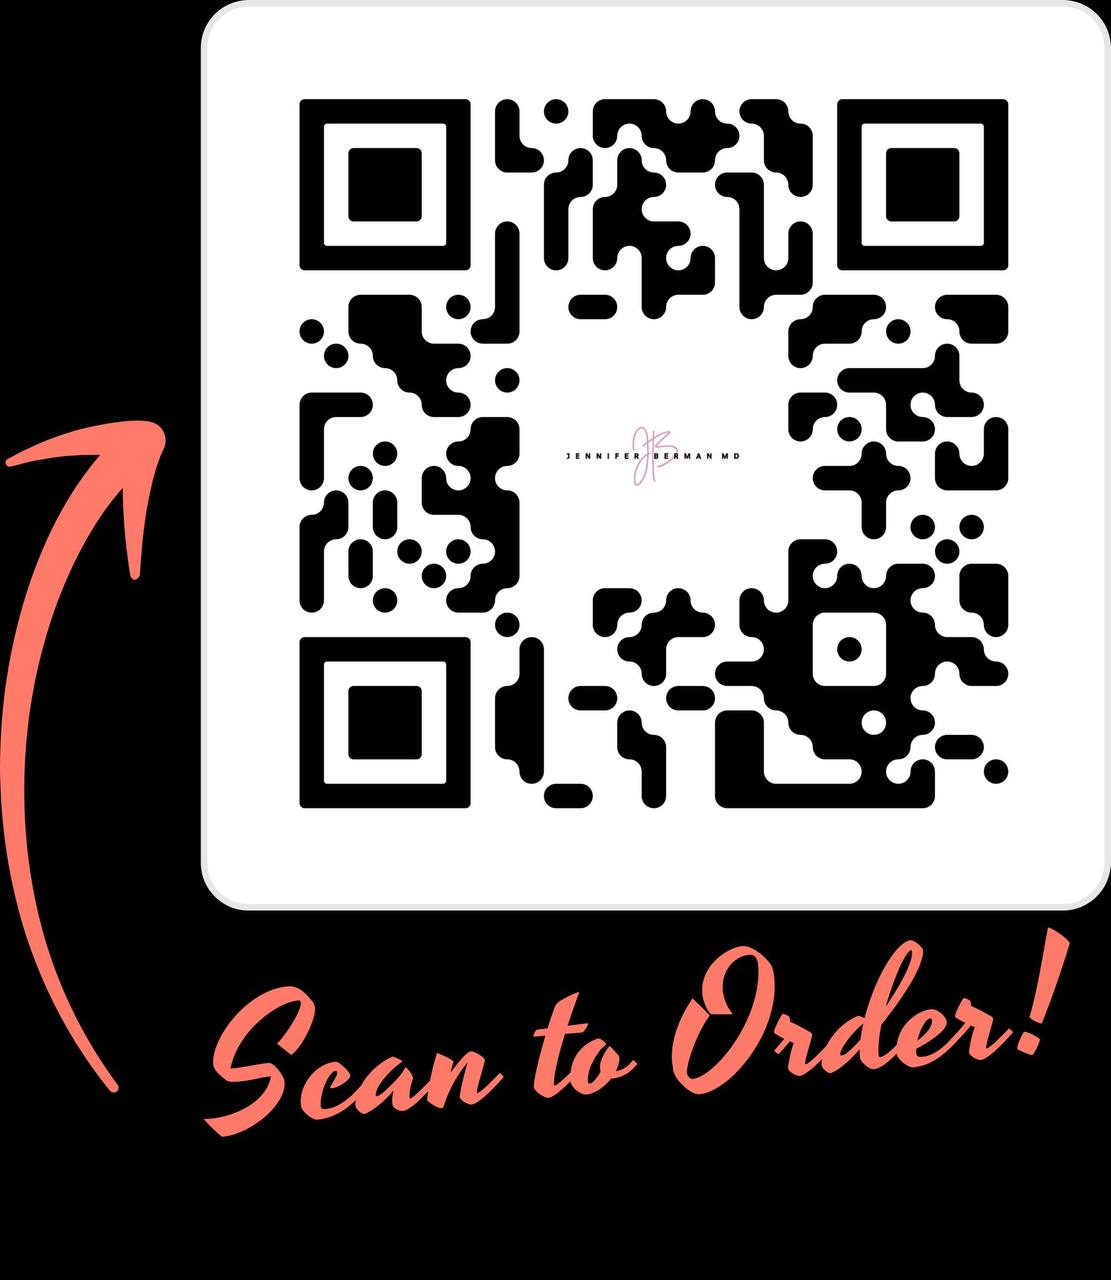 A QR code highlighted by a red arrow with the text "Scan for Sexual Health Expert in Los Angeles!" indicating a prompt for customers to scan the code to access services or consultations, likely in a health